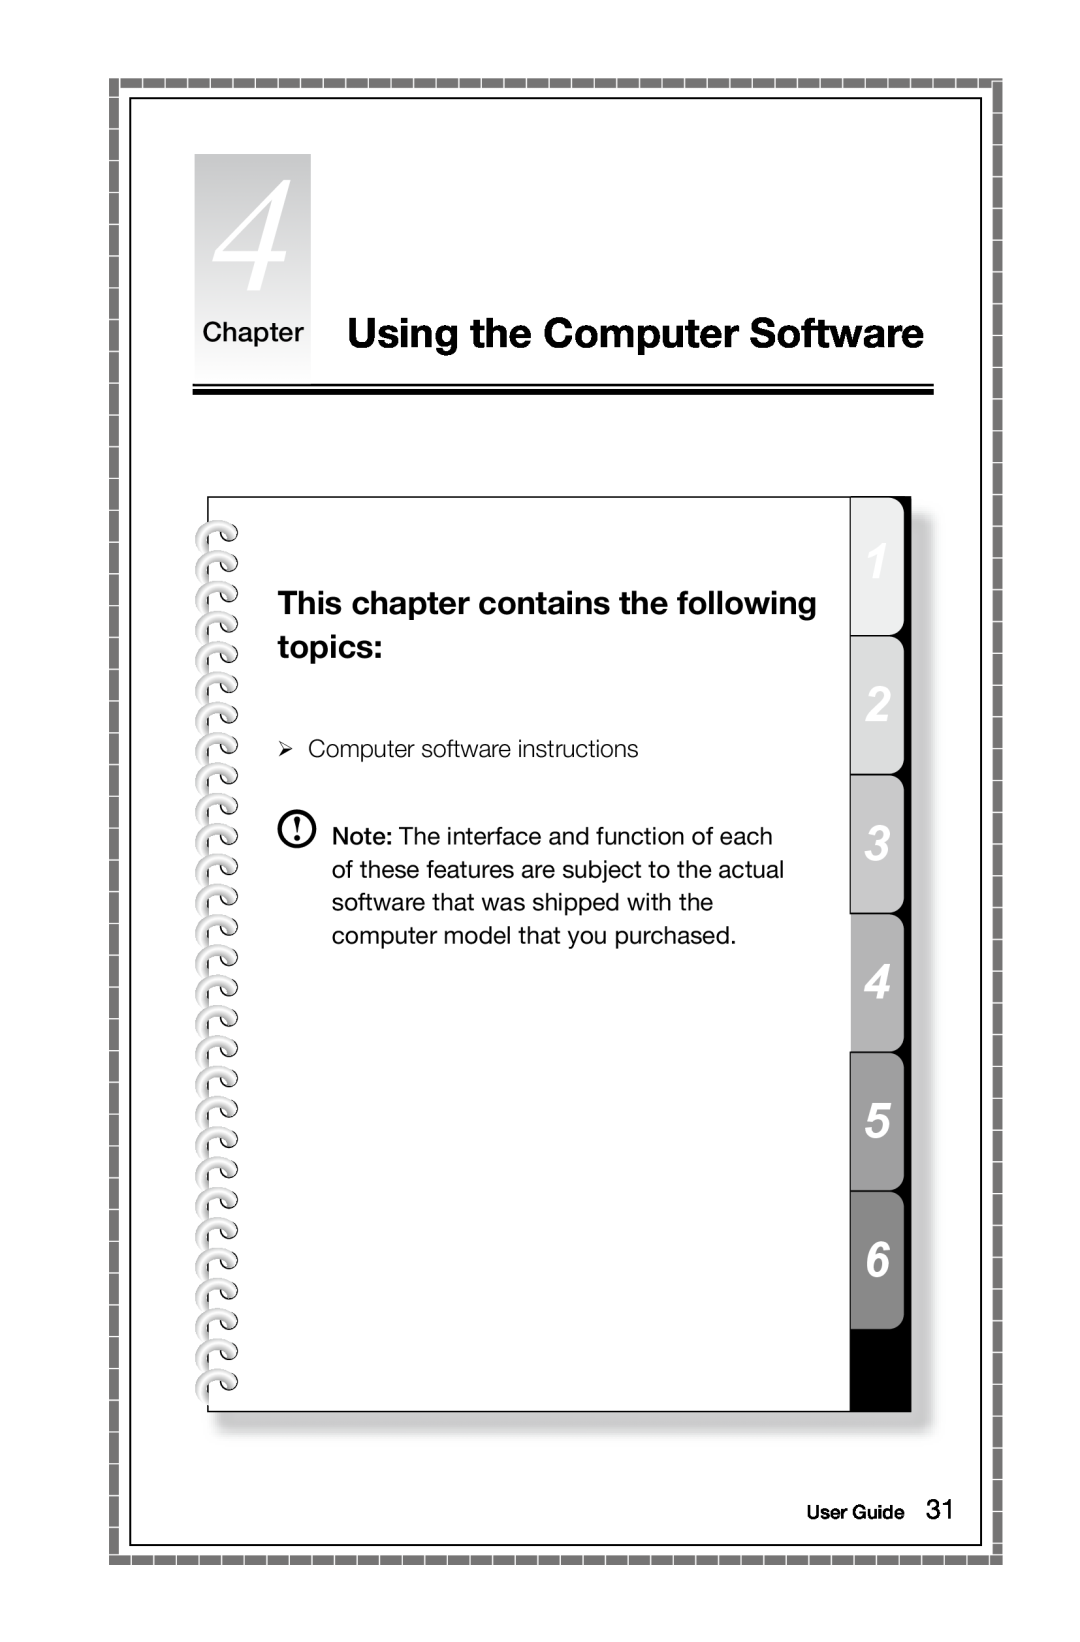 Lenovo B3, 10051, 10052 manual Chapter Using the Computer Software, This chapter contains the following topics, User Guide 